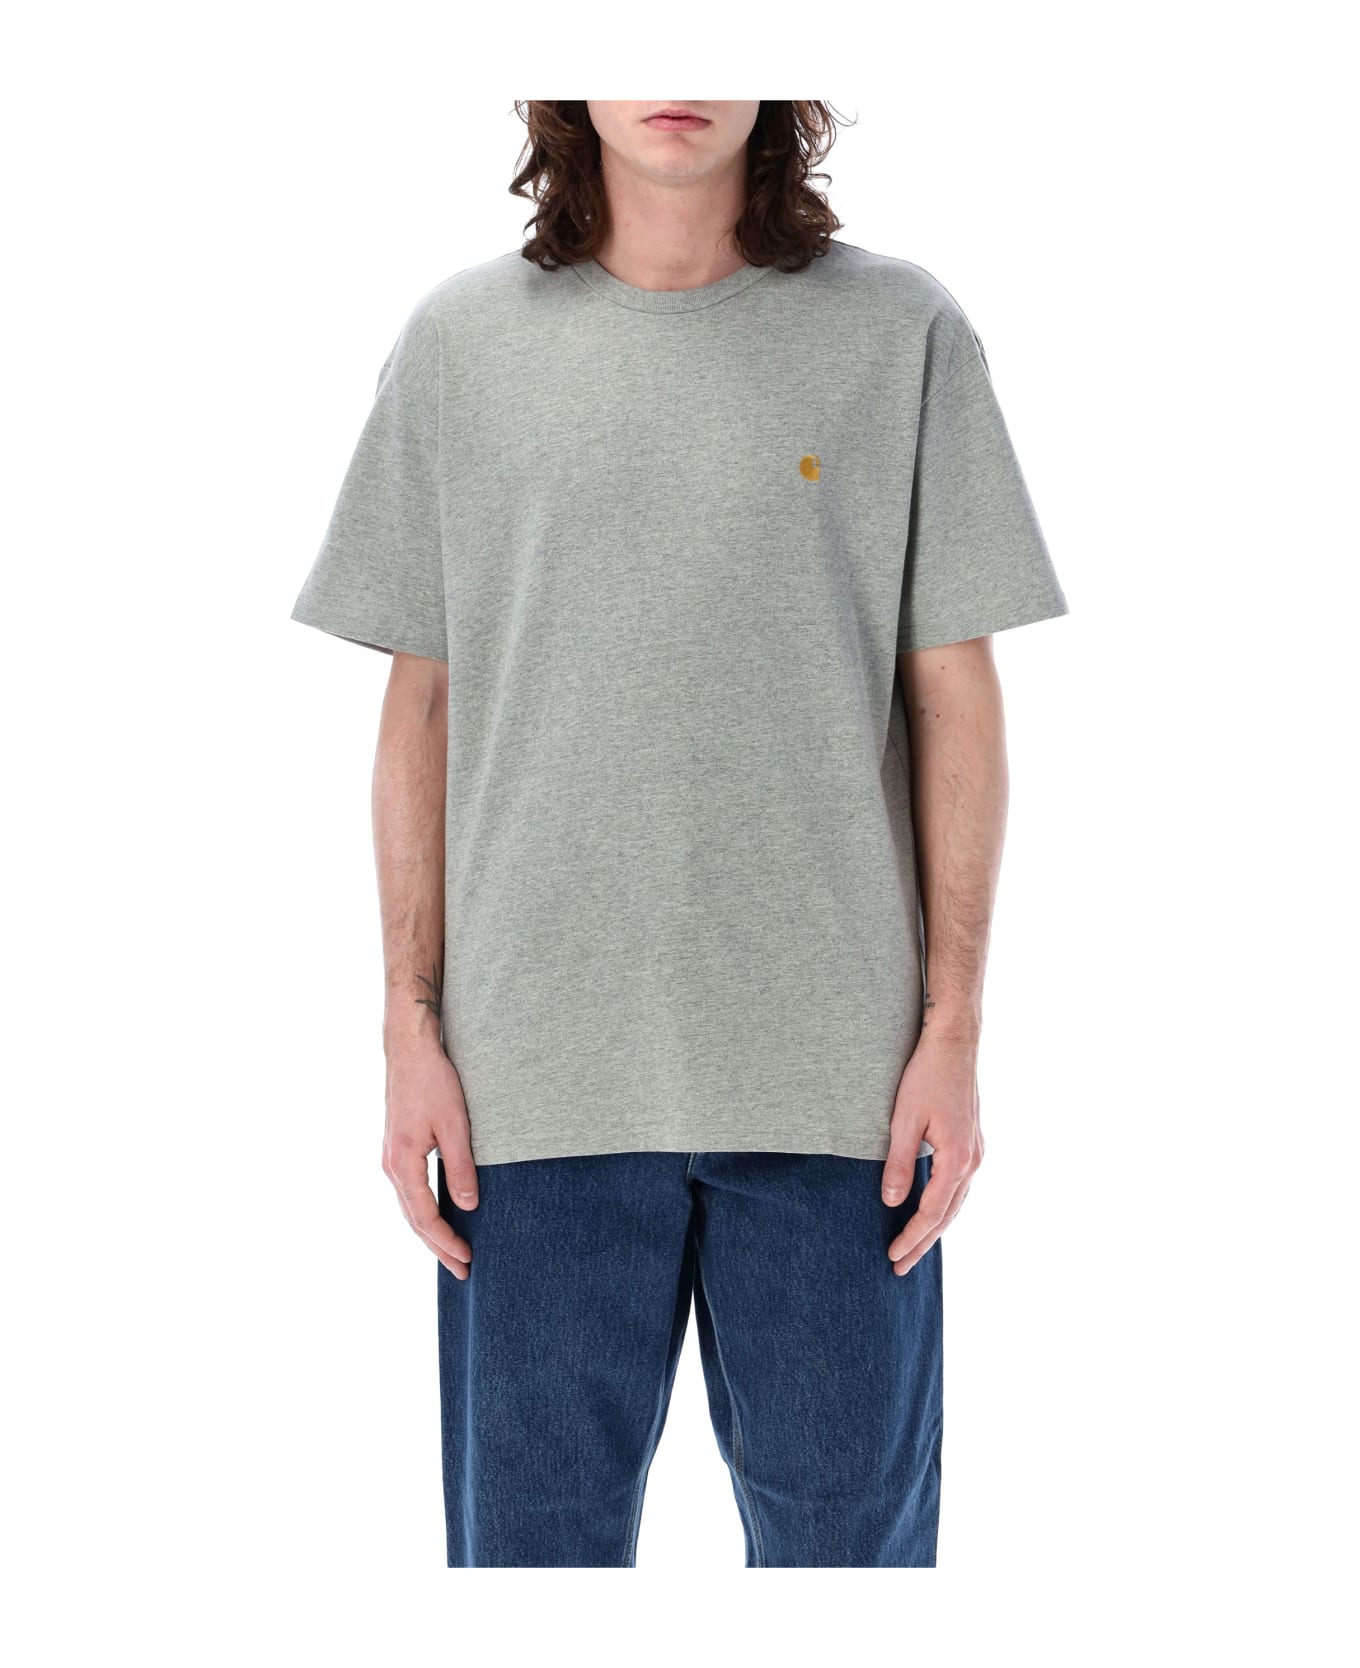 Carhartt Chase S/s T-shirt - GREY HEATHER